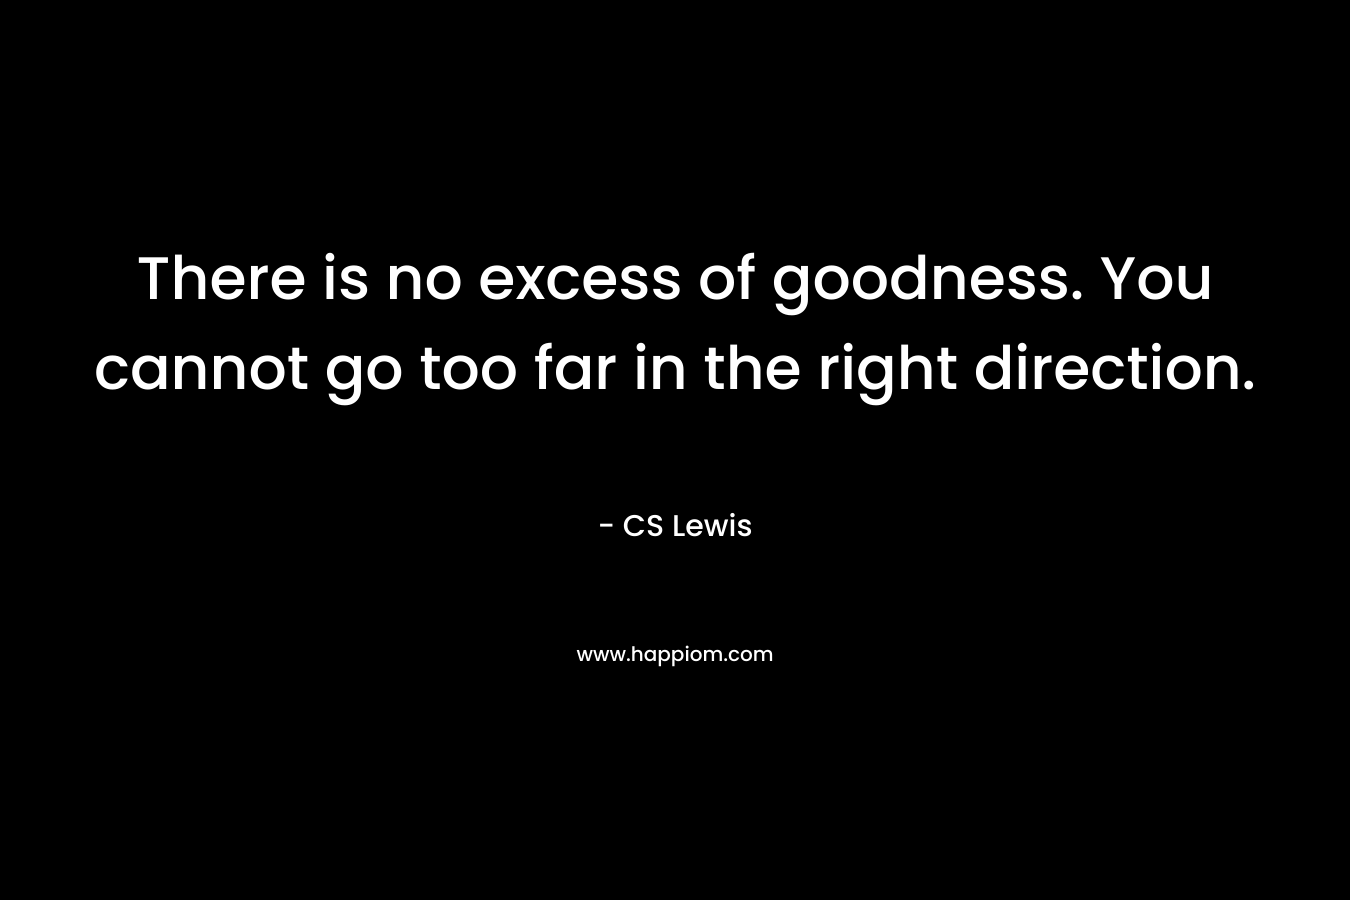 There is no excess of goodness. You cannot go too far in the right direction. – CS Lewis